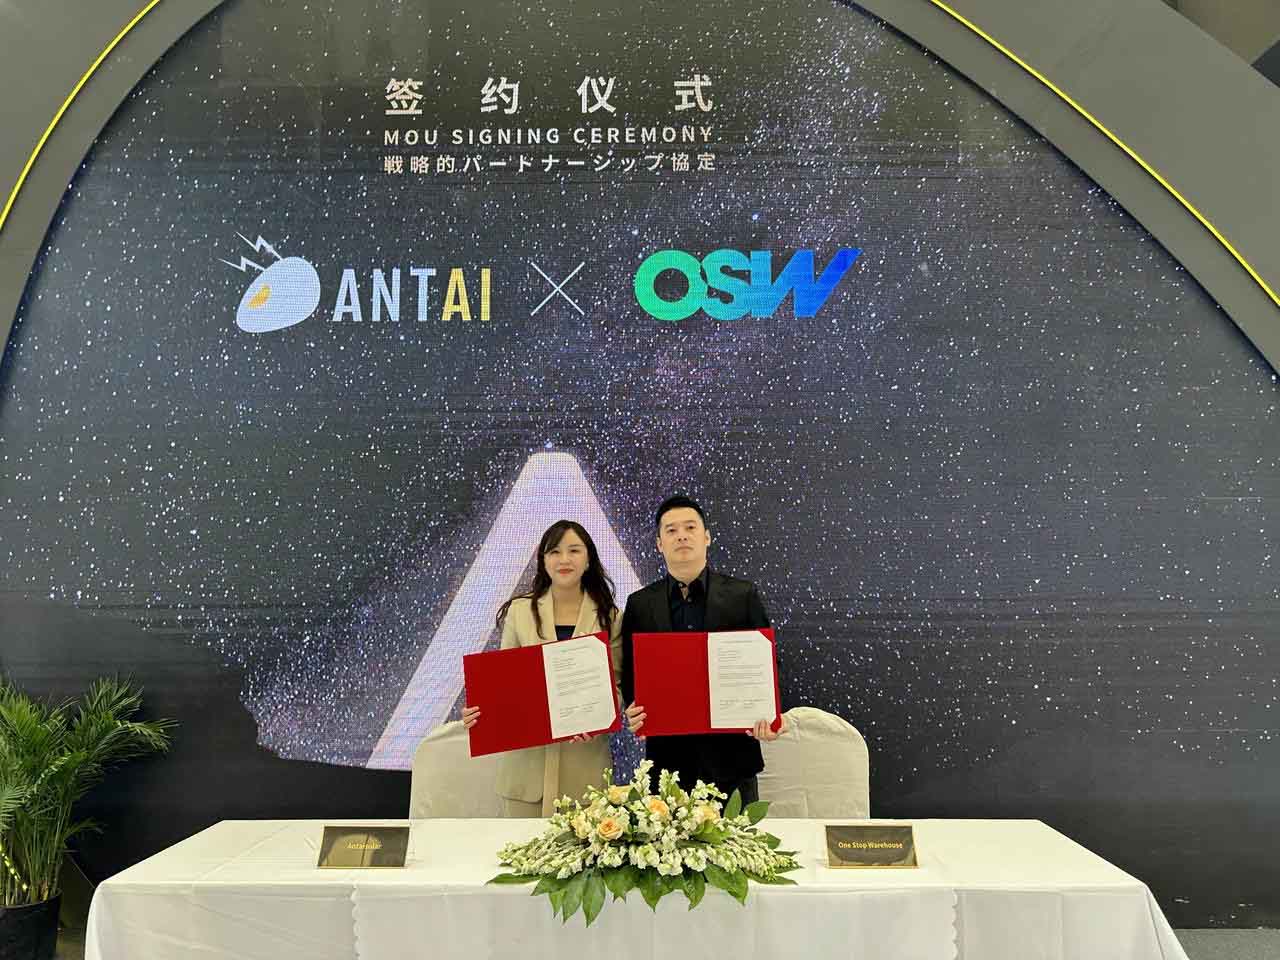 Antaisolar And One Stop Warehouse Have Signed a Strategic Cooperation Agreement for 1GW Global Solar Project, Expanding Partnerships on a Global Scale